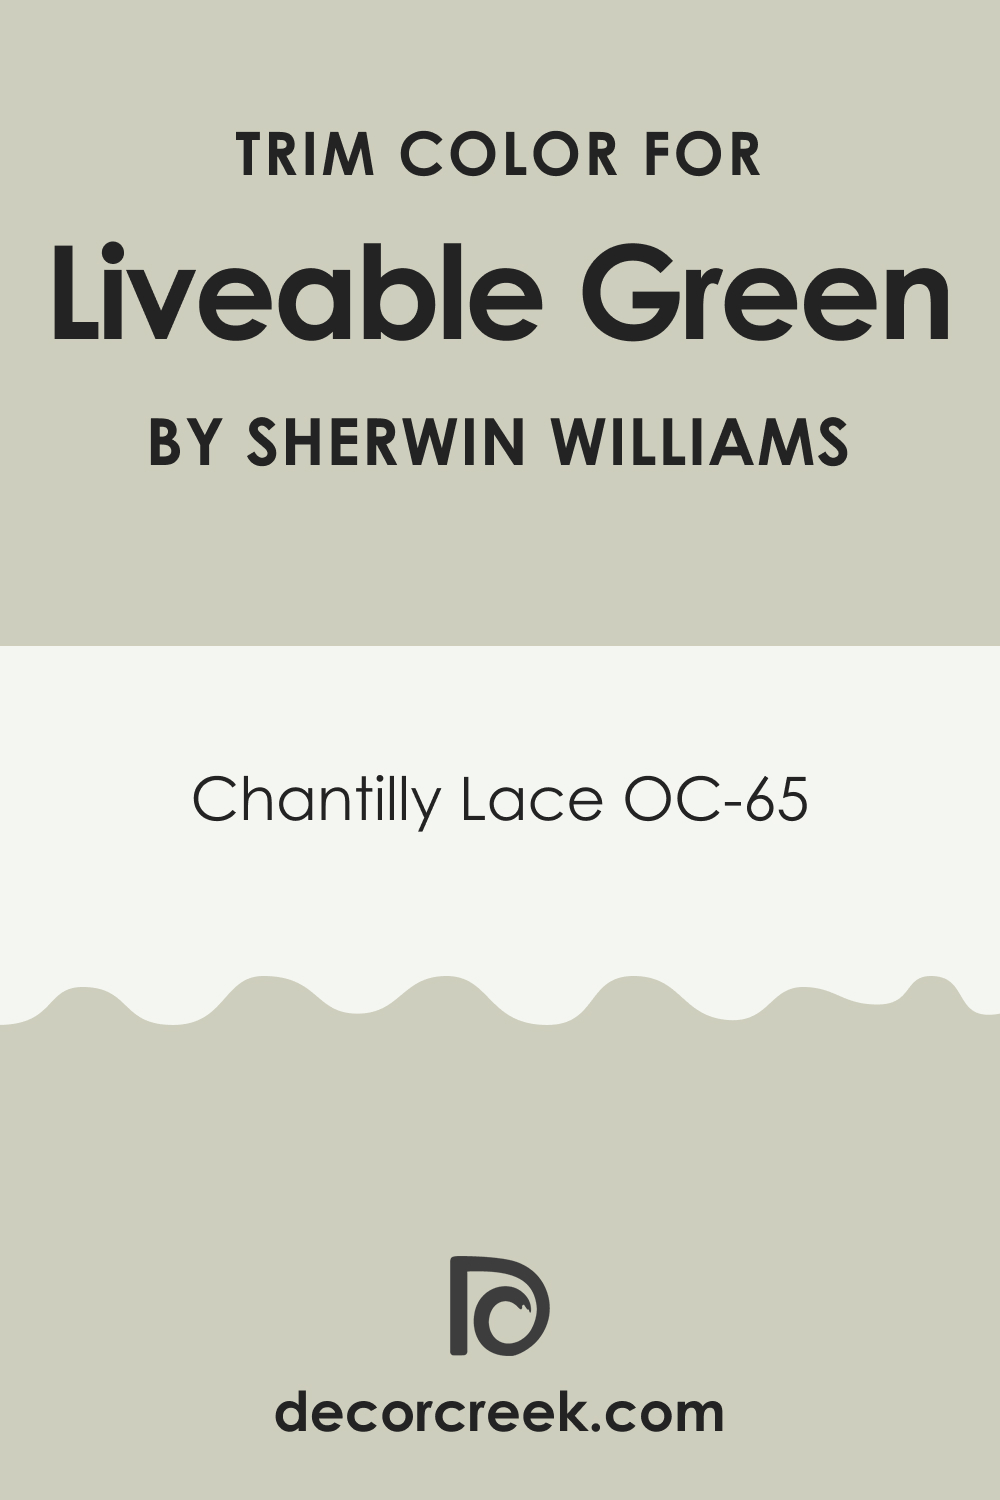 What Is the Best Trim Color to Use With SW Liveable Green?